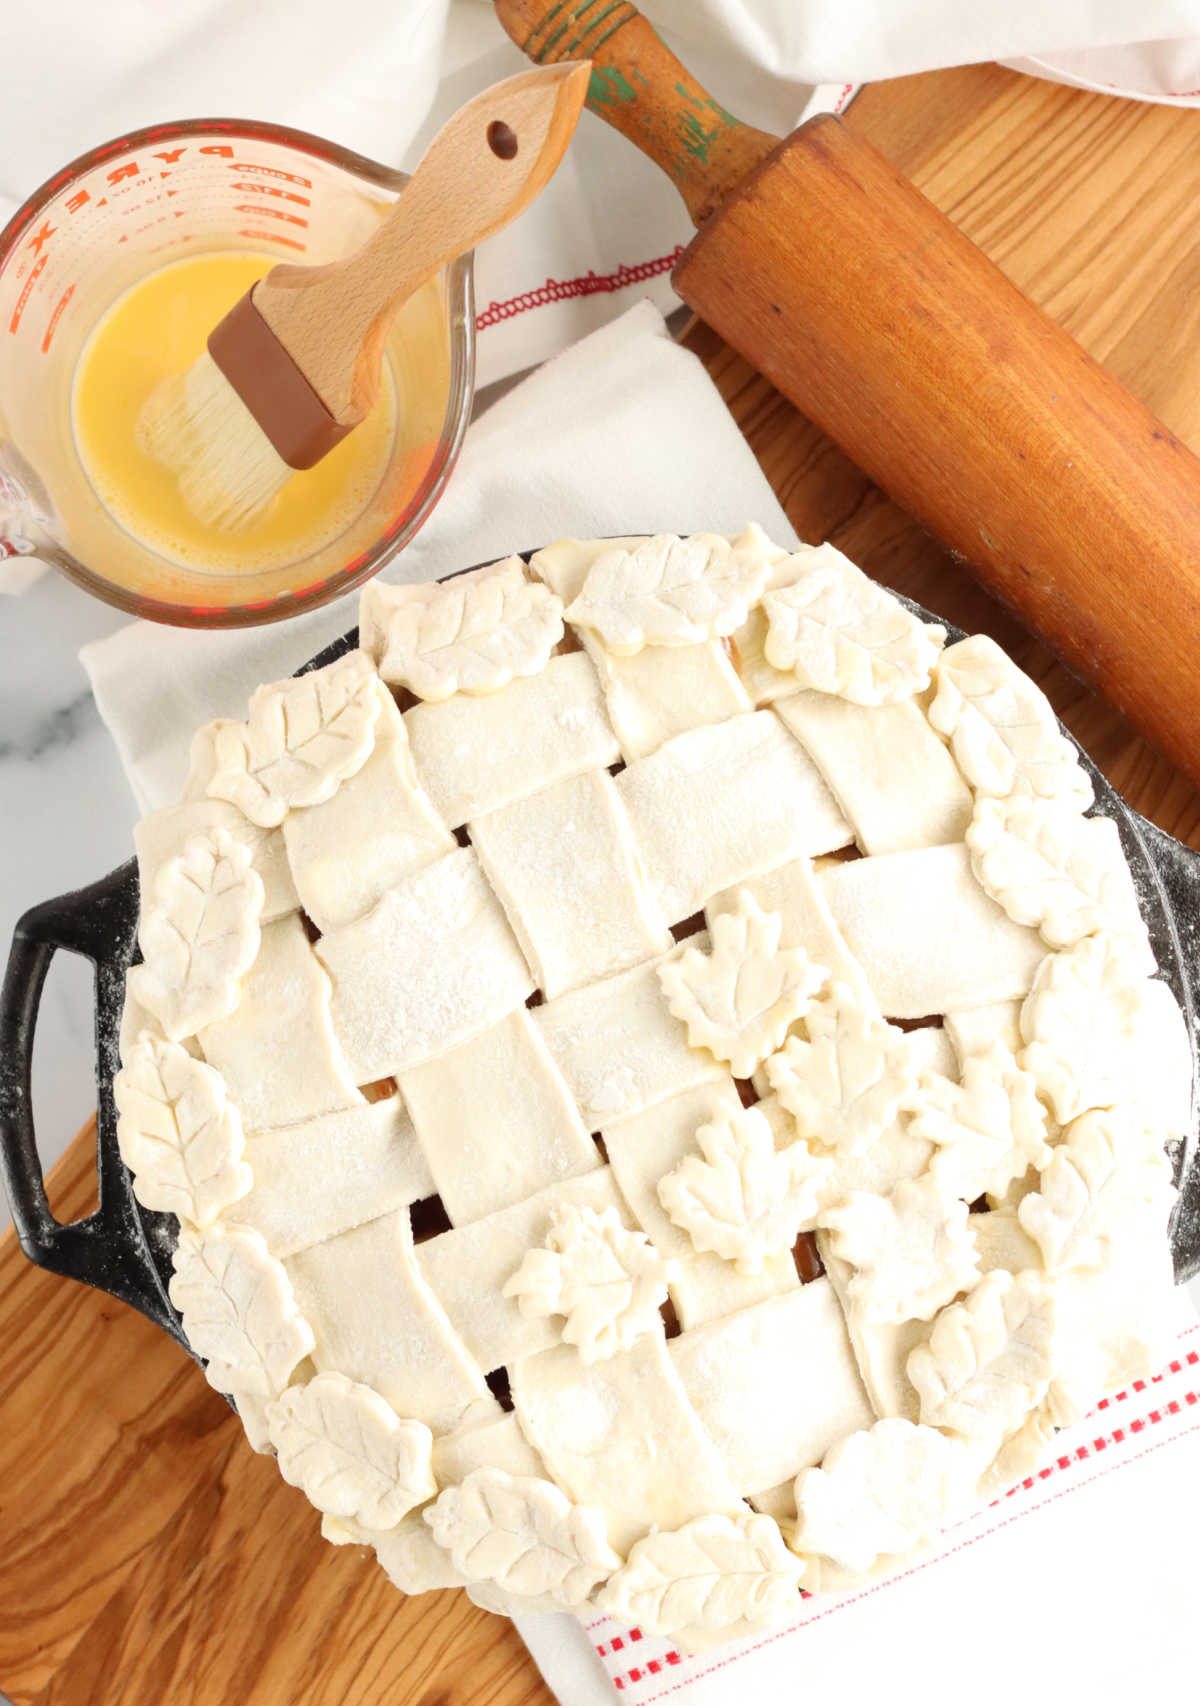 Unbaked pie with lattice crust and leaves in dual handle cast iron pie pan on wooden cutting board.